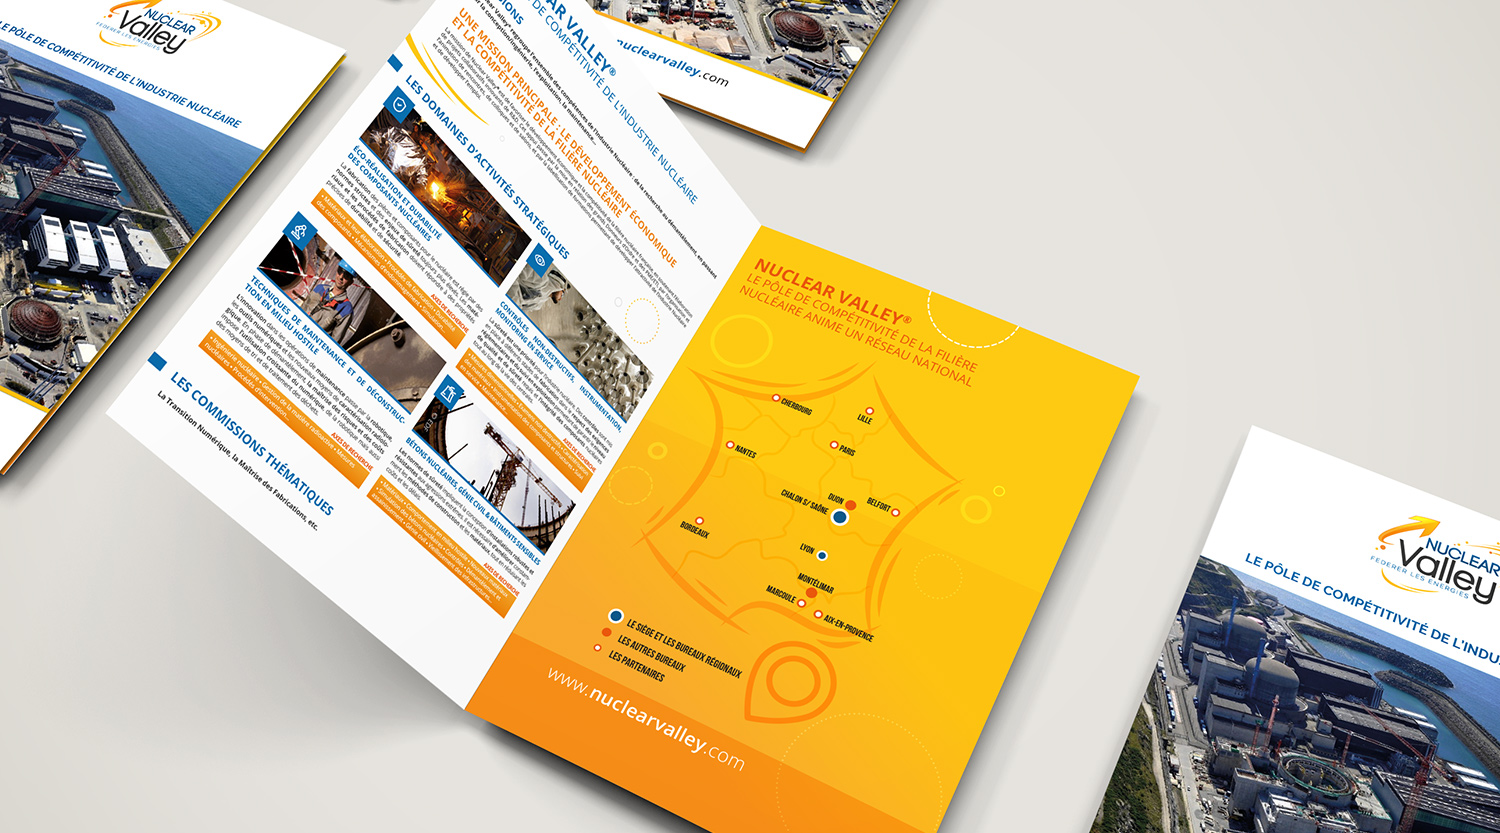 eclolink-agence-web-marketing-dijon-reference-client-nuclear-valley_plaquette